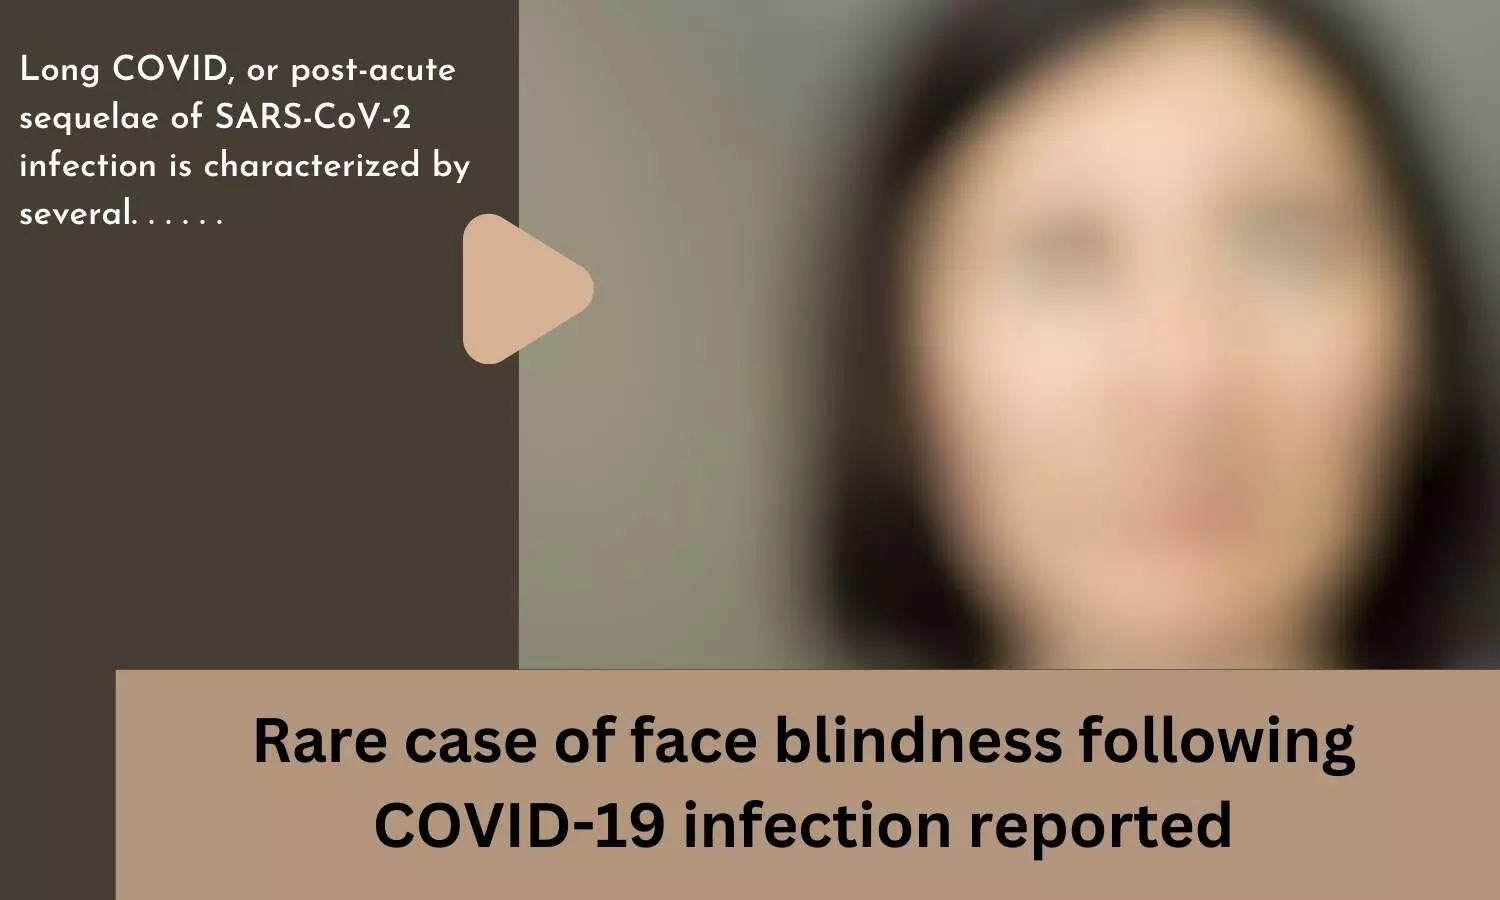 Rare case of face blindness following COVID-19 infection reported